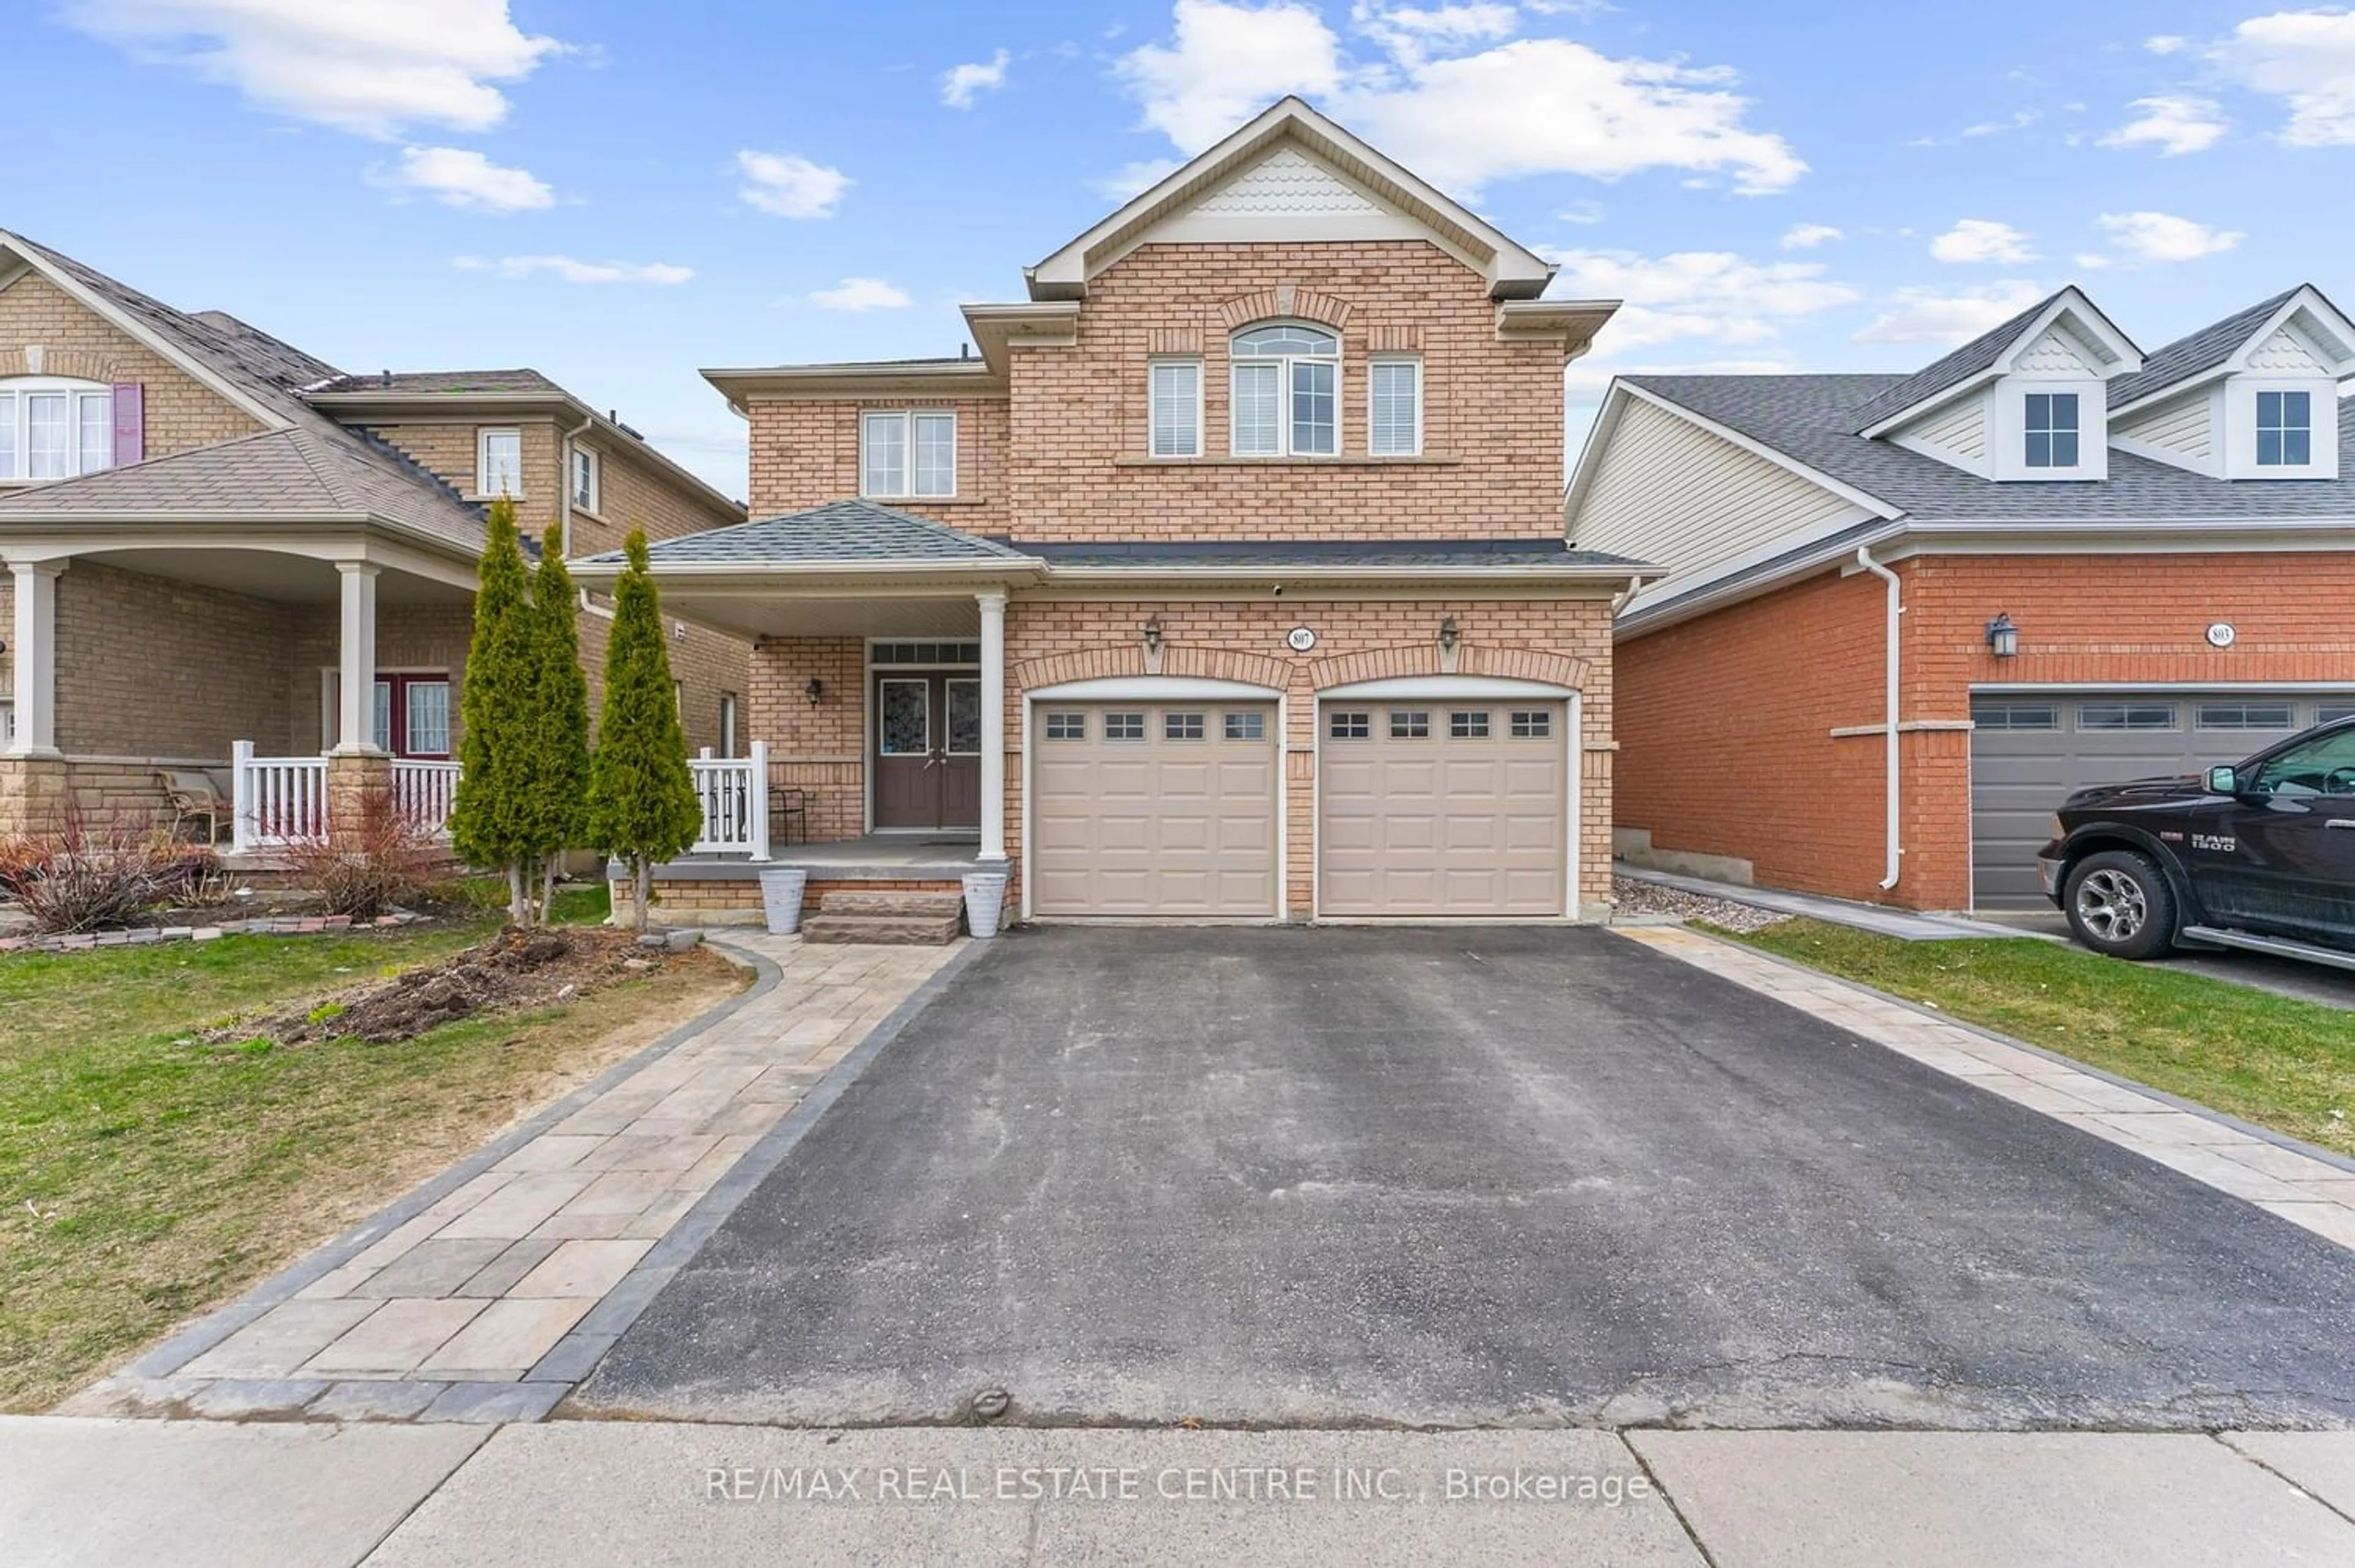 Home with brick exterior material for 807 Ormond Dr, Oshawa Ontario L1K 3B6